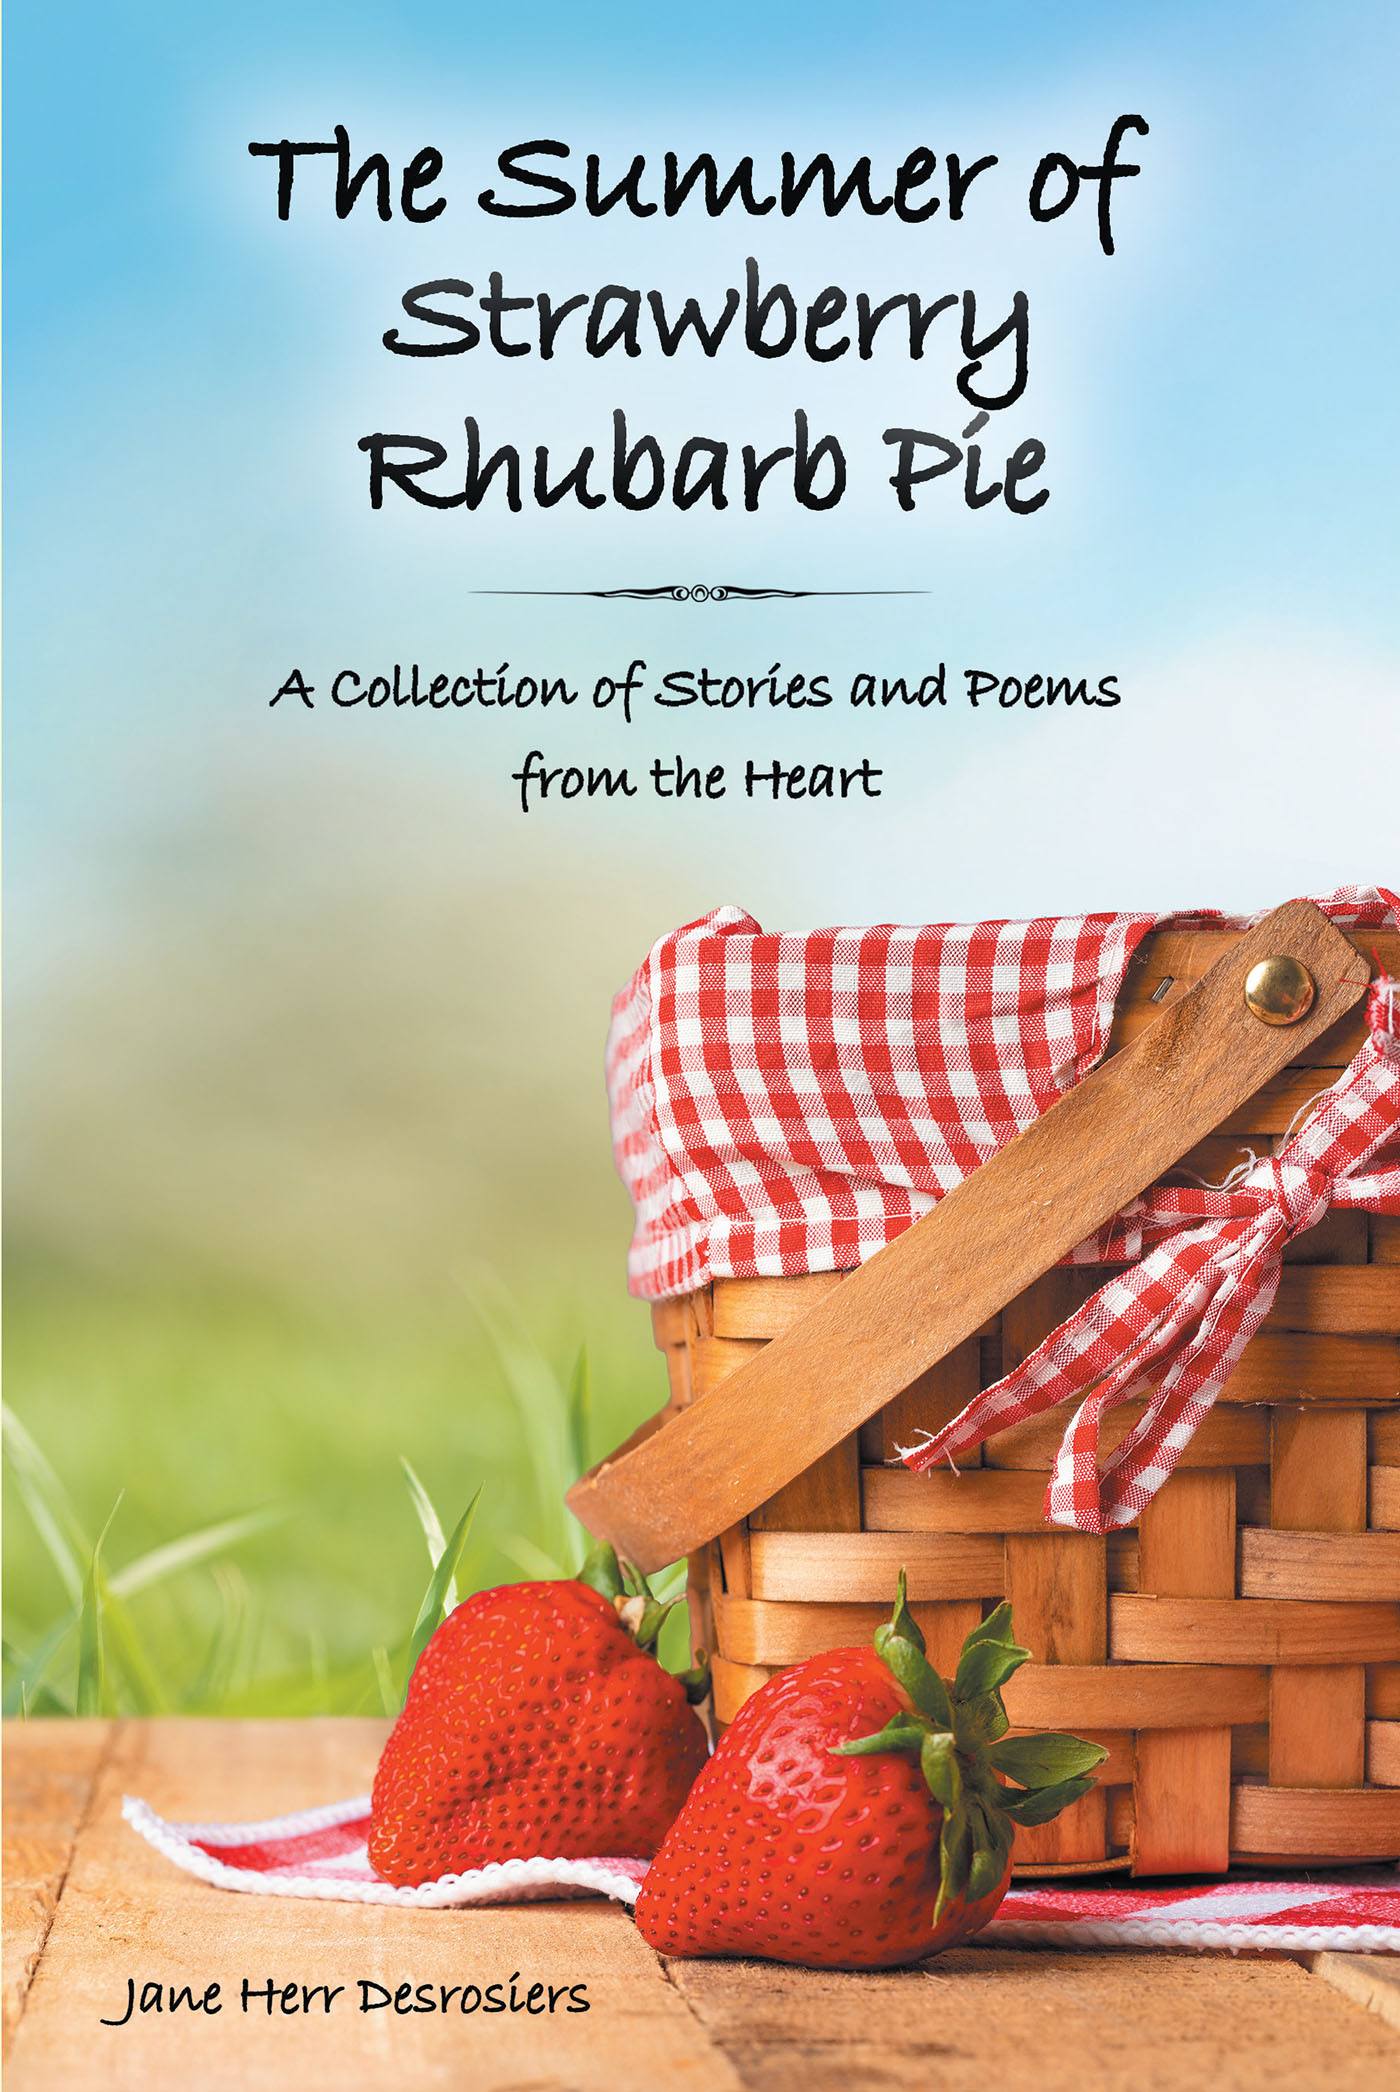 Jane Herr Desrosiers’s New Book, "The Summer of Strawberry Rhubarb Pie," is a Compelling Collection of Stories and Poems Straight from the Author’s Heart